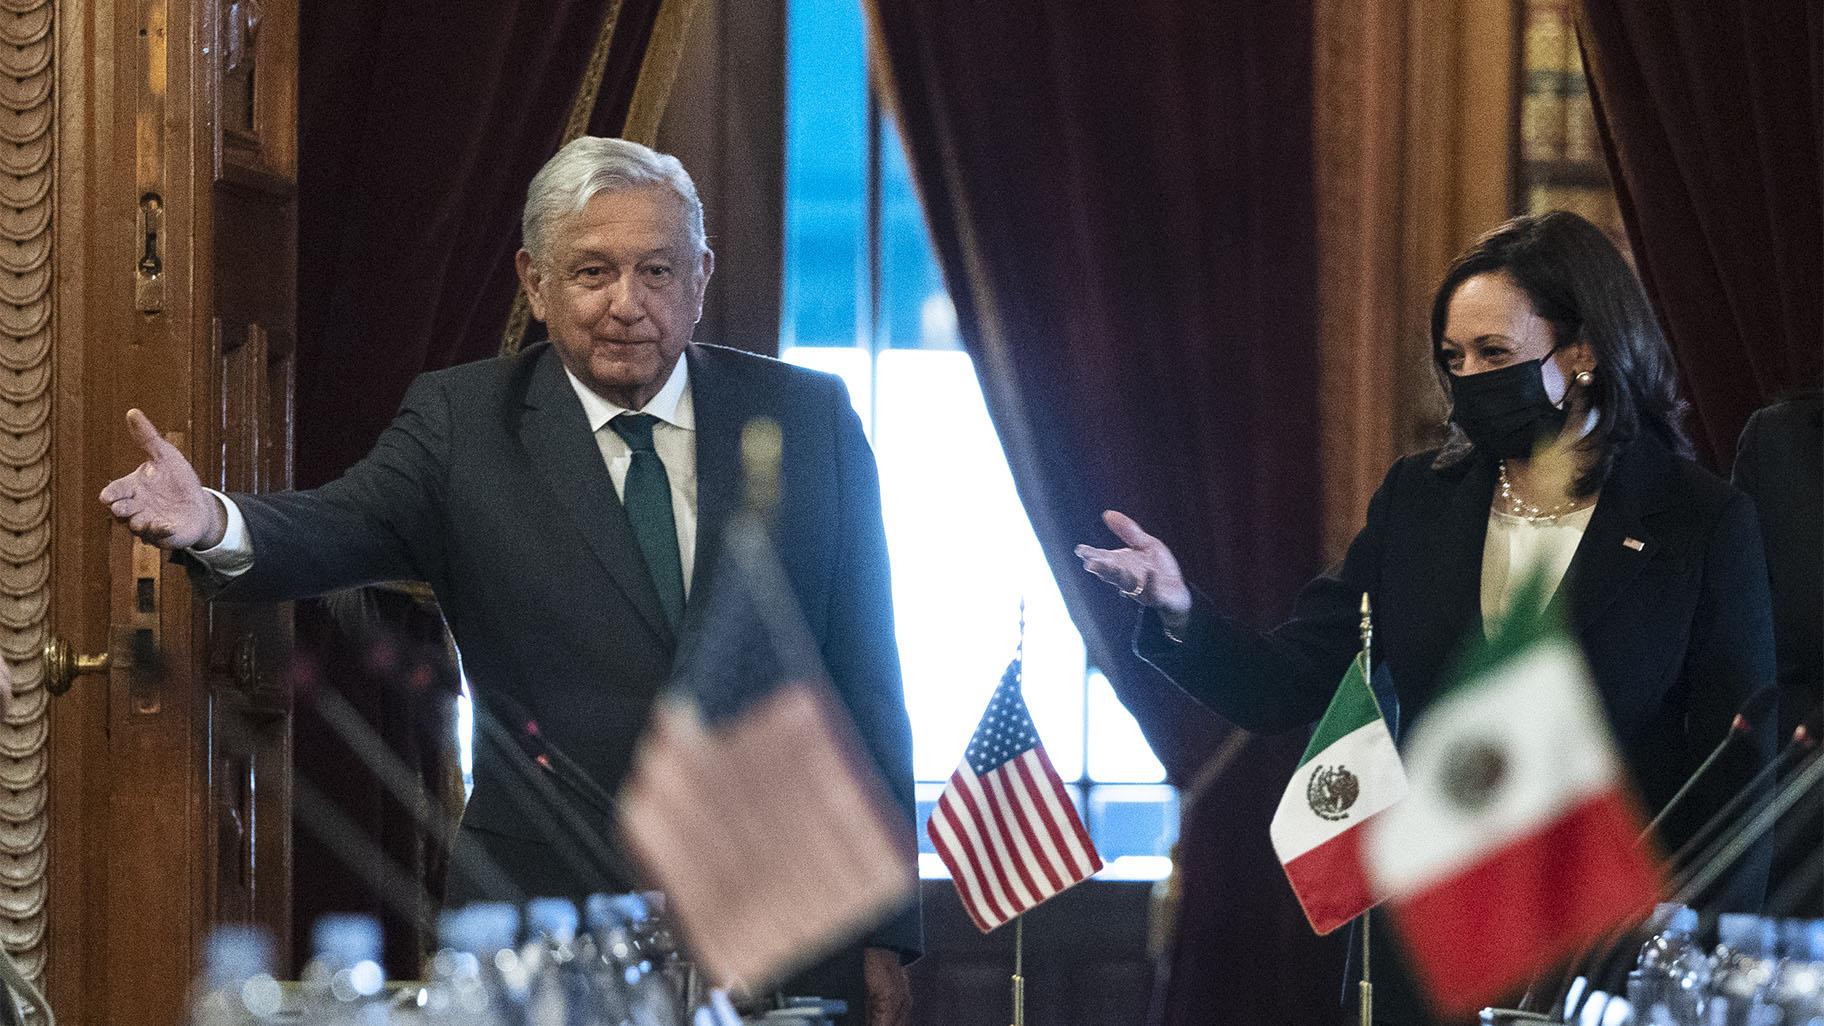 Vice President Kamala Harris and Mexican President Andres Manuel Lopez Obrador arrive for a bilateral meeting Tuesday, June 8, 2021, at the National Palace in Mexico City. (AP Photo / Jacquelyn Martin)